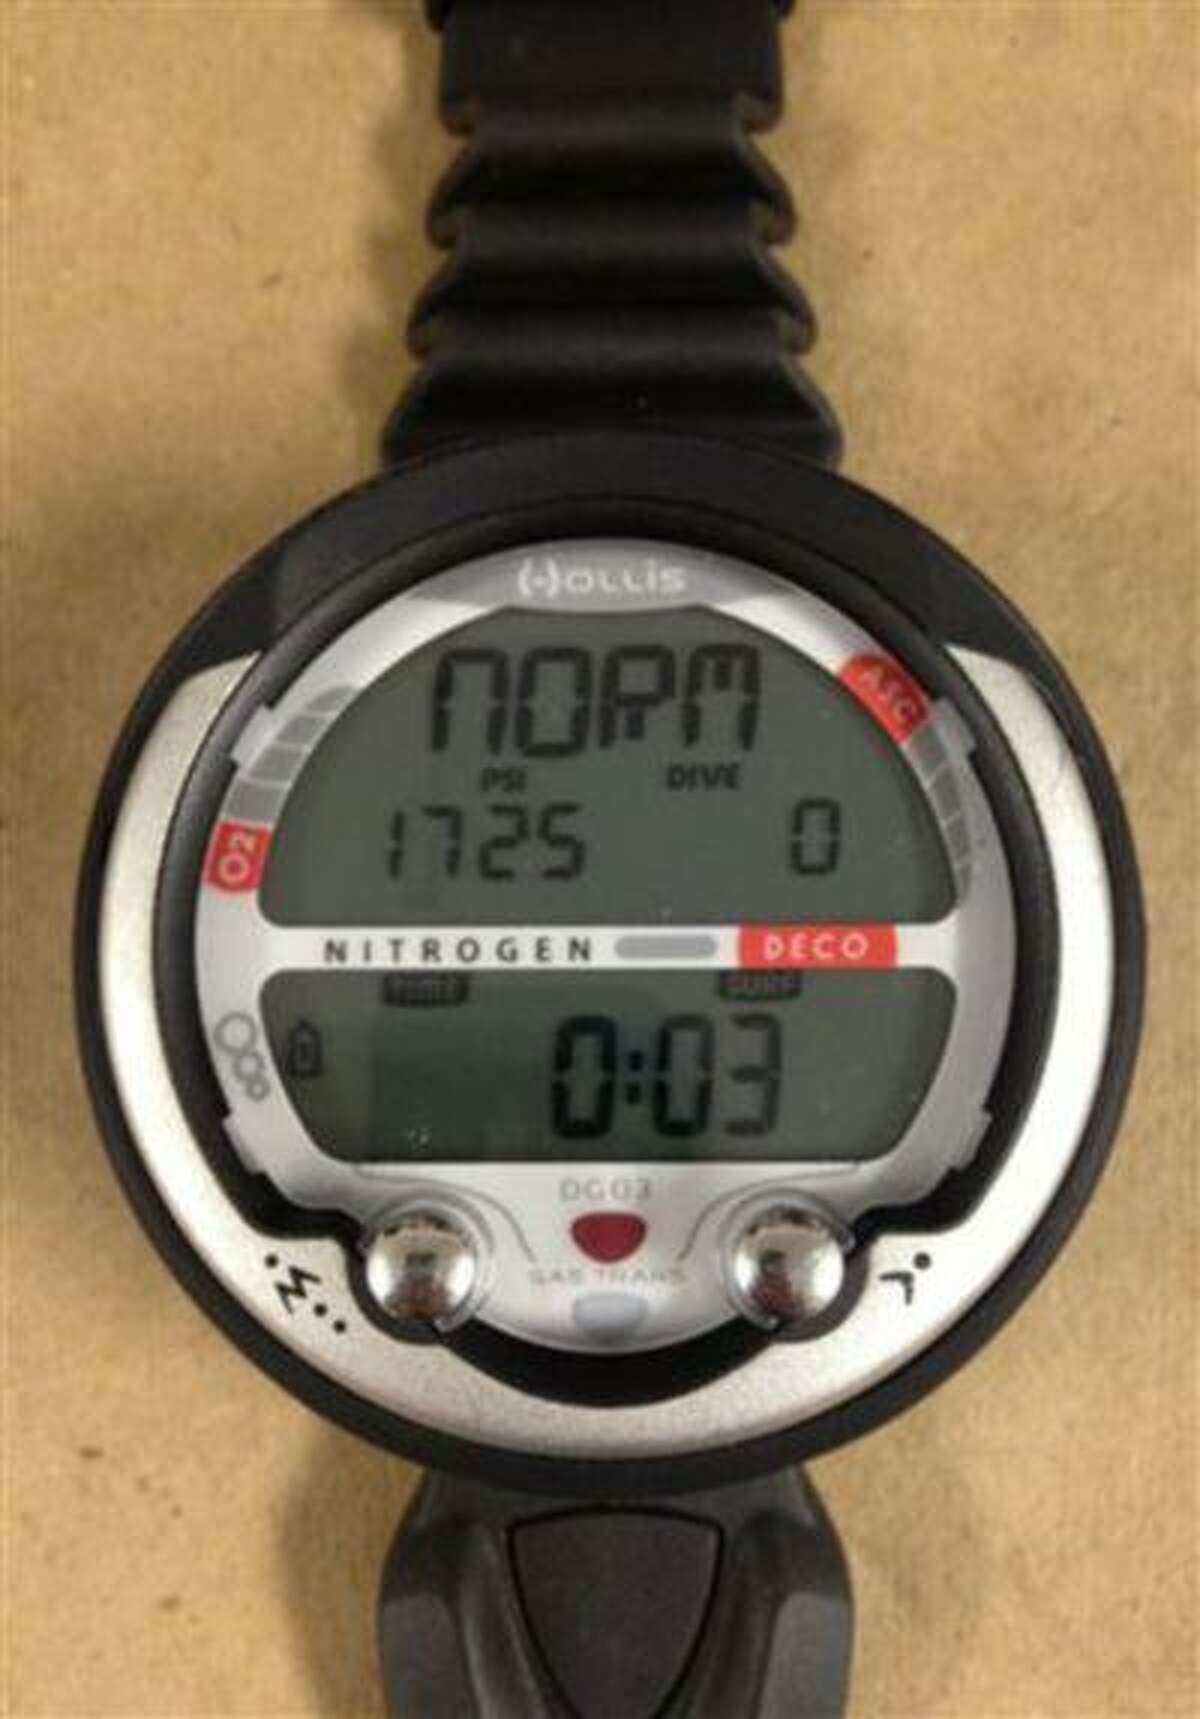 This photo provided by the U.S. Consumer Product Safety Commission shows a Hollis DG03 dive computer that is being recalled because when used with an optional integrated transmitter, the computer can malfunction and display an incorrect tank pressure reading to the diver. (AP Photo/U.S. Consumer Product Safety Commission)